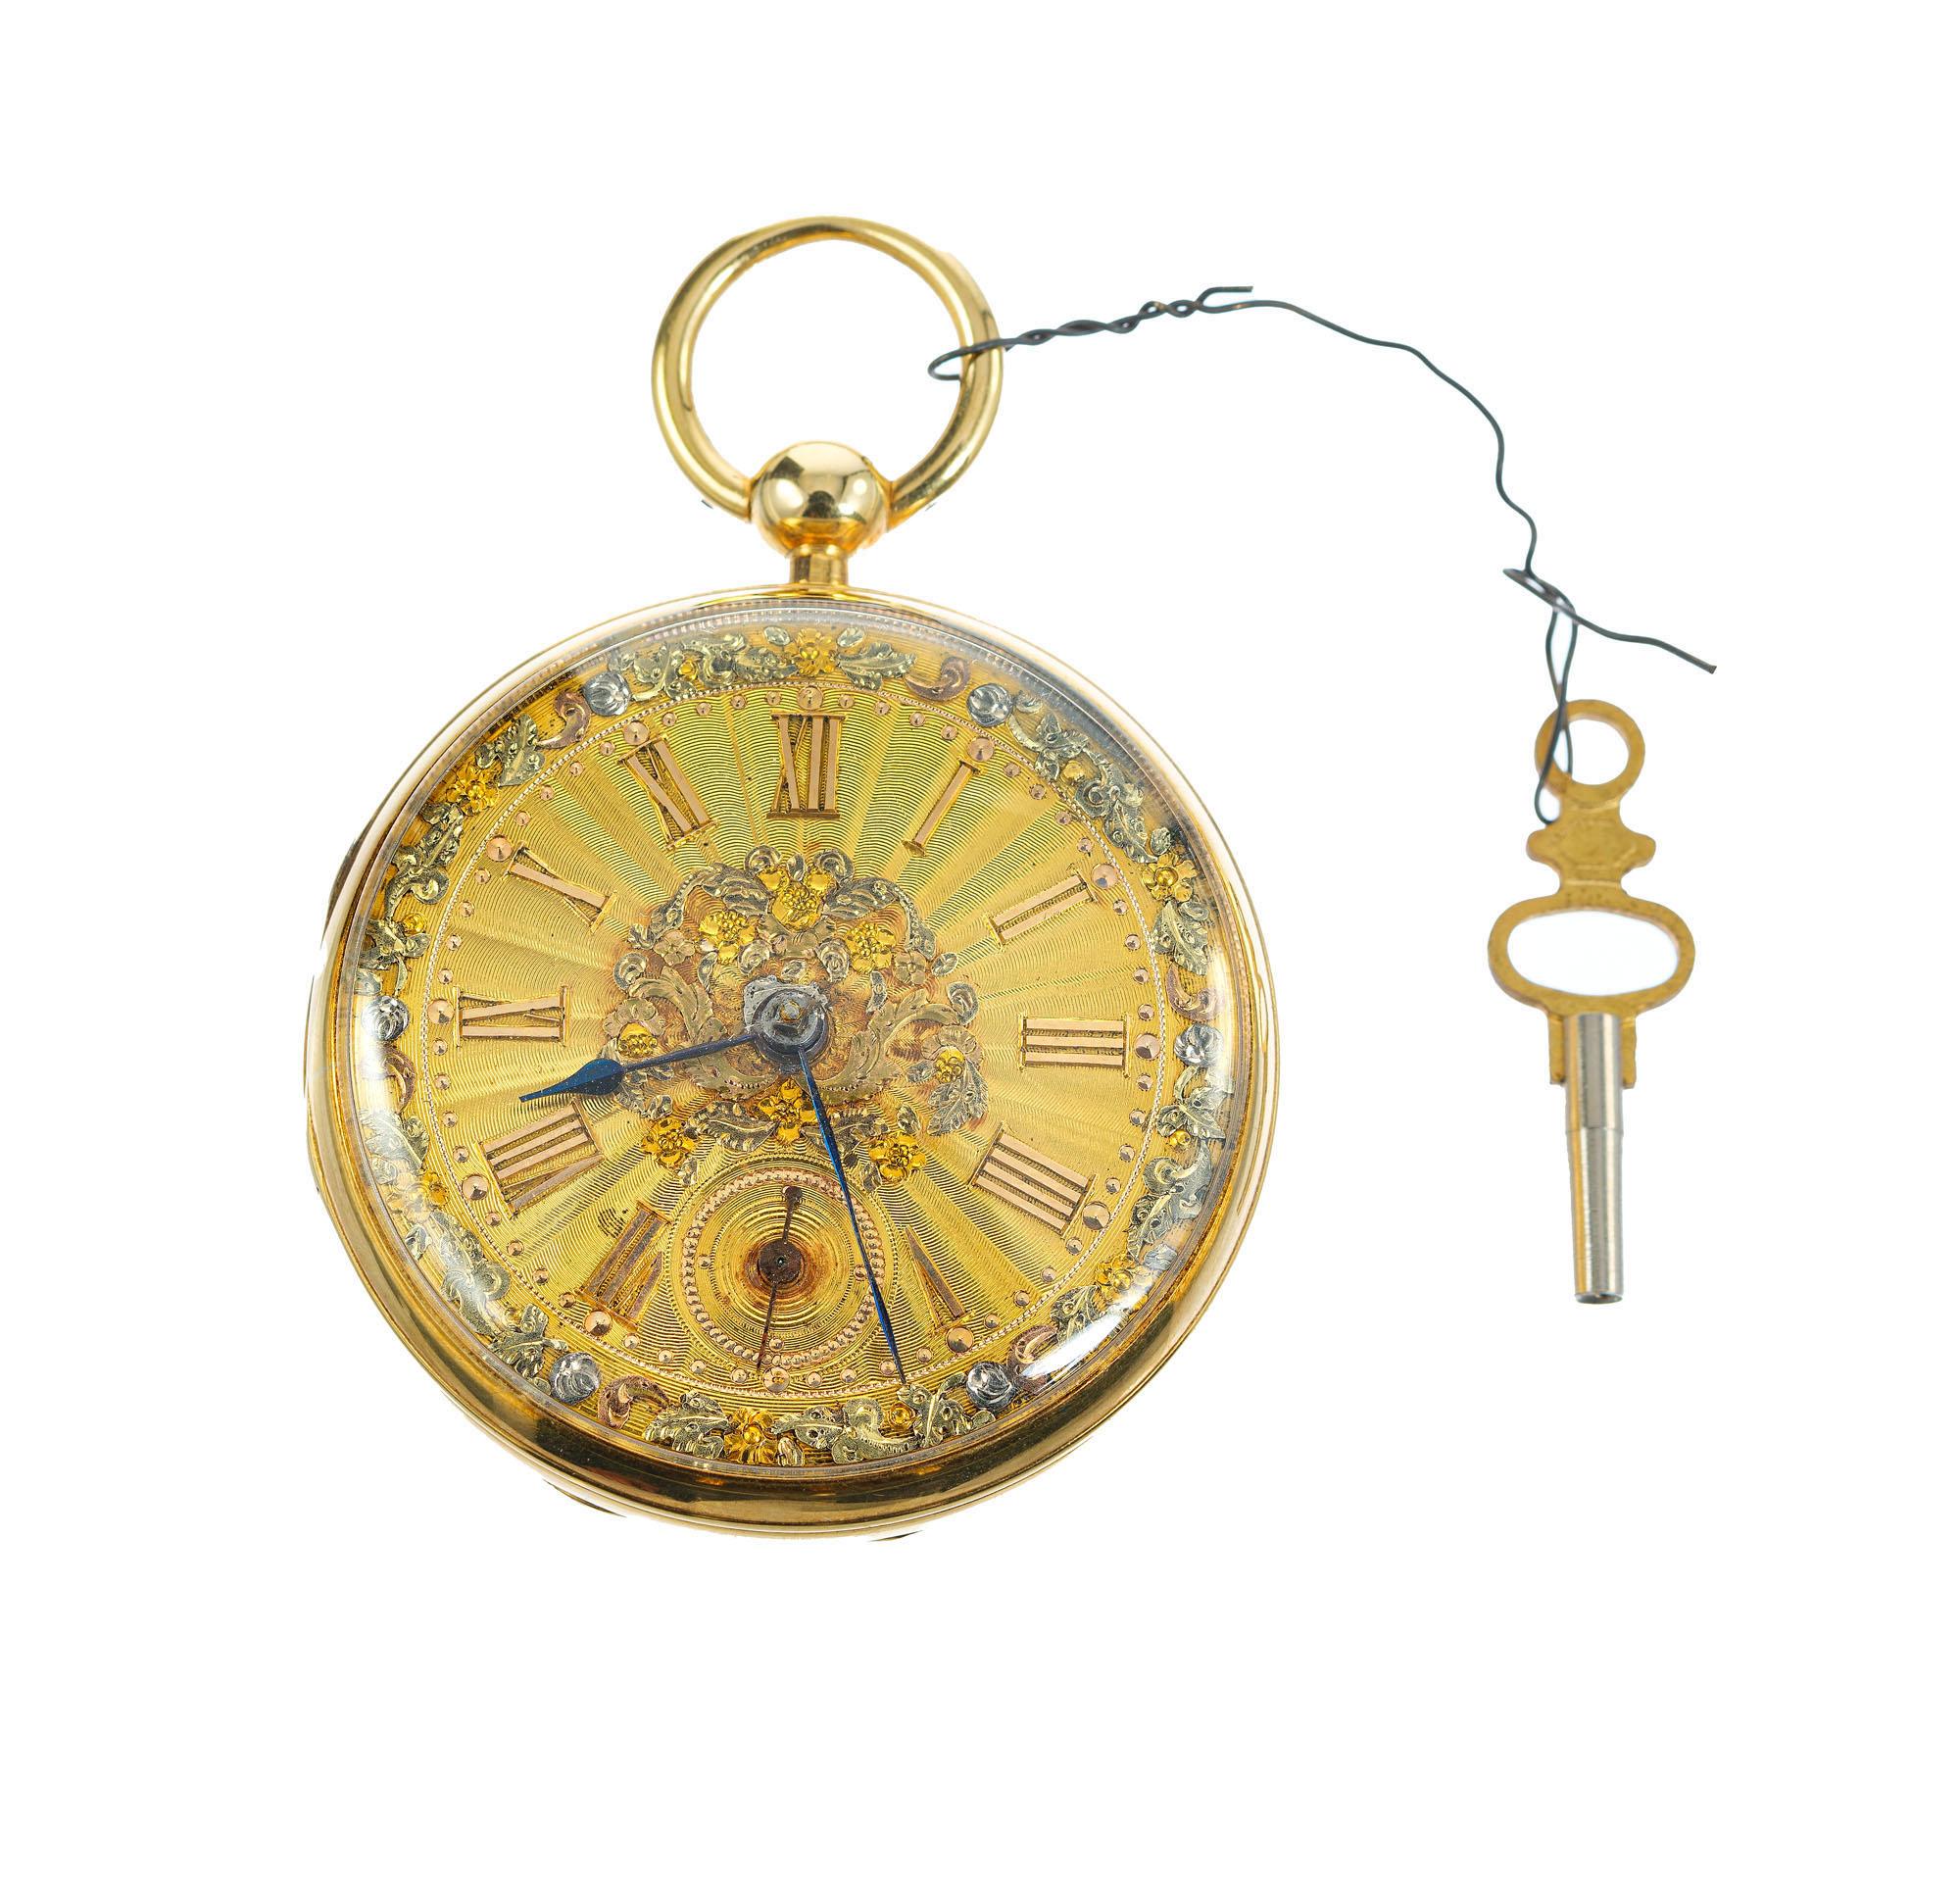 Open face John Moncas Liverpool 18k gold pocket watch. circa 1810-1840 with solid gold tri color highly detailed dial. Runs well and keeps good time. Fusee chain drive movement, key wind, key set. 

18k Yellow, white & rose gold 
Diameter: